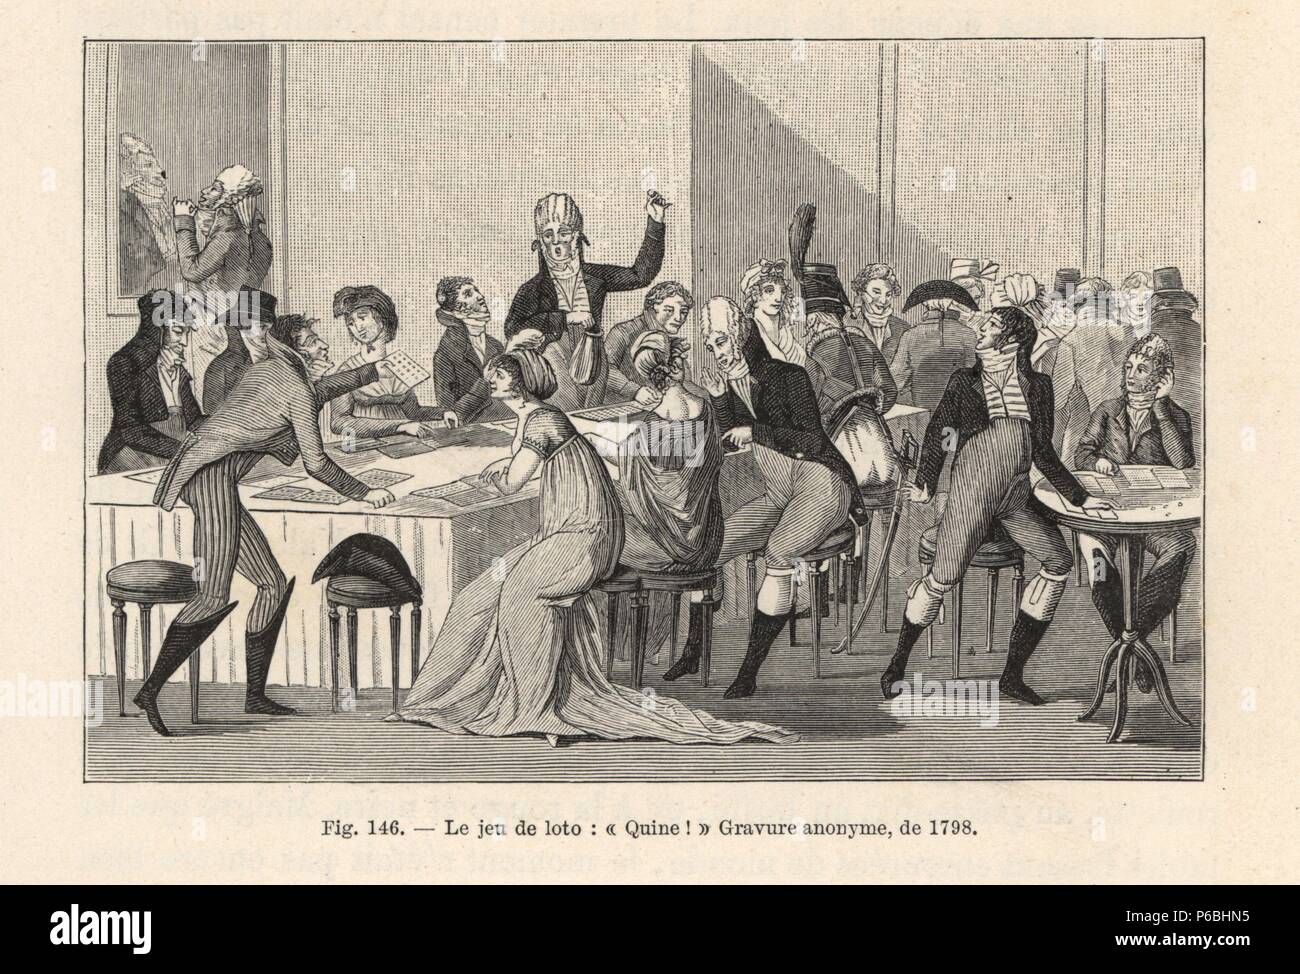 Fashionable Parisians playing a game of chance called loto or lotto, 1798. Incroyables in high cravats, gilets, redingotes, wigs, breeches and boots. Engraving from Paul Lacroix's 'Directoire, Consulat et Empire,' Paris, 1884. Stock Photo